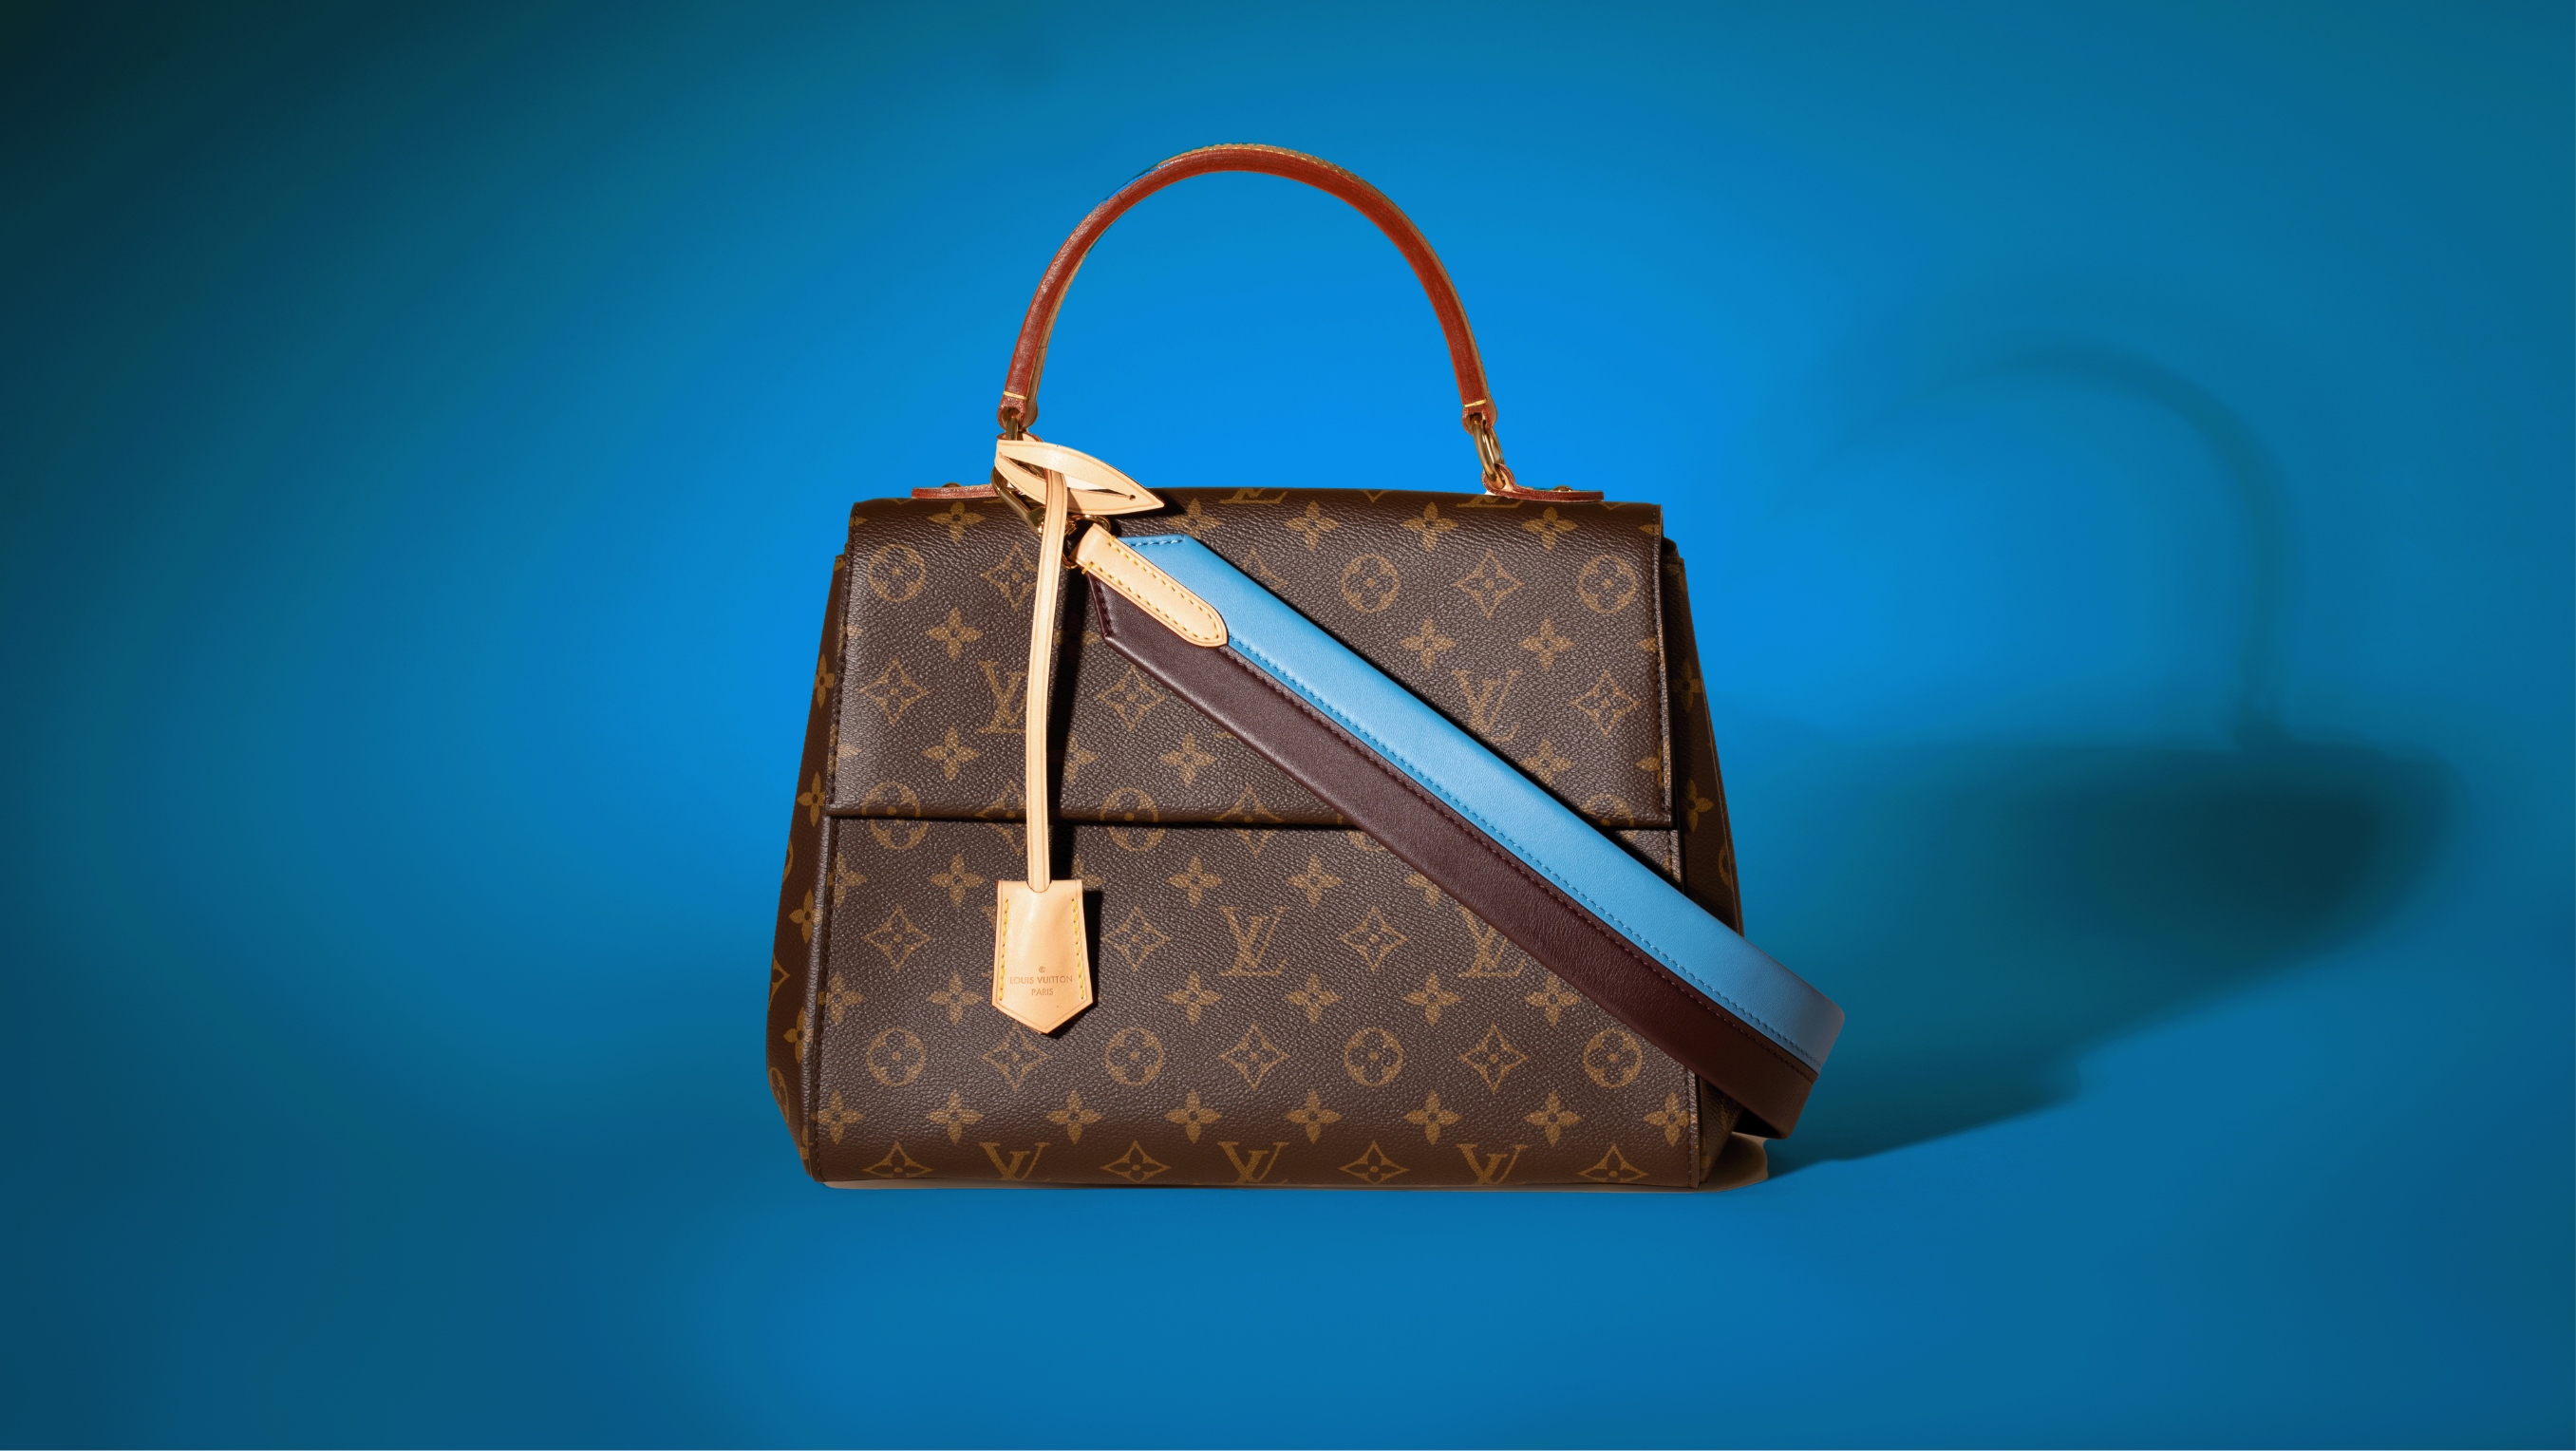 how much are real louis vuitton bags